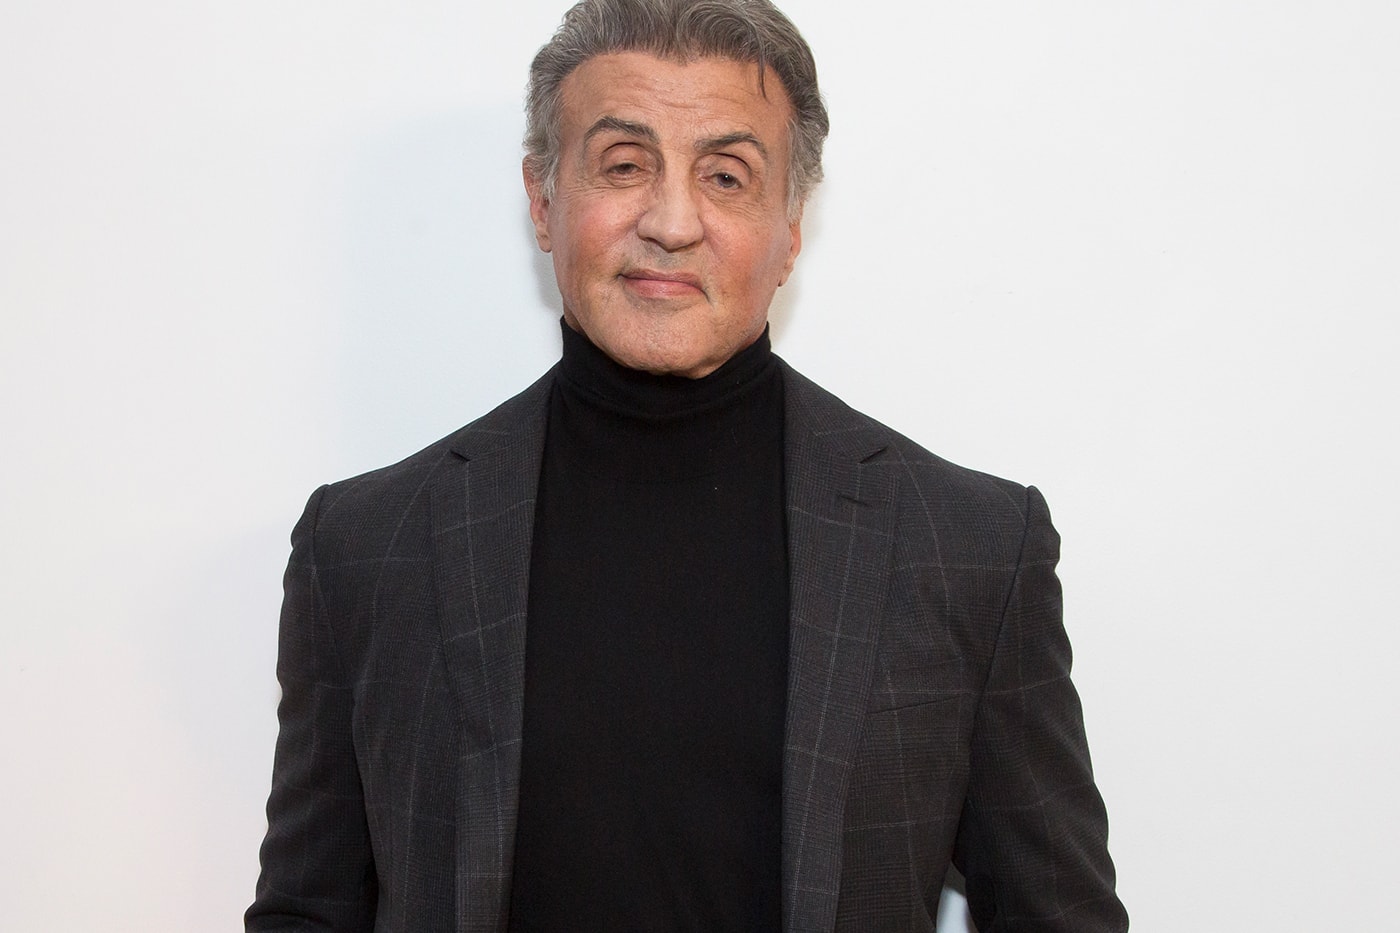 Sylvester Stallone 正式加入《The Suicide Squad》全新續作演員陣容